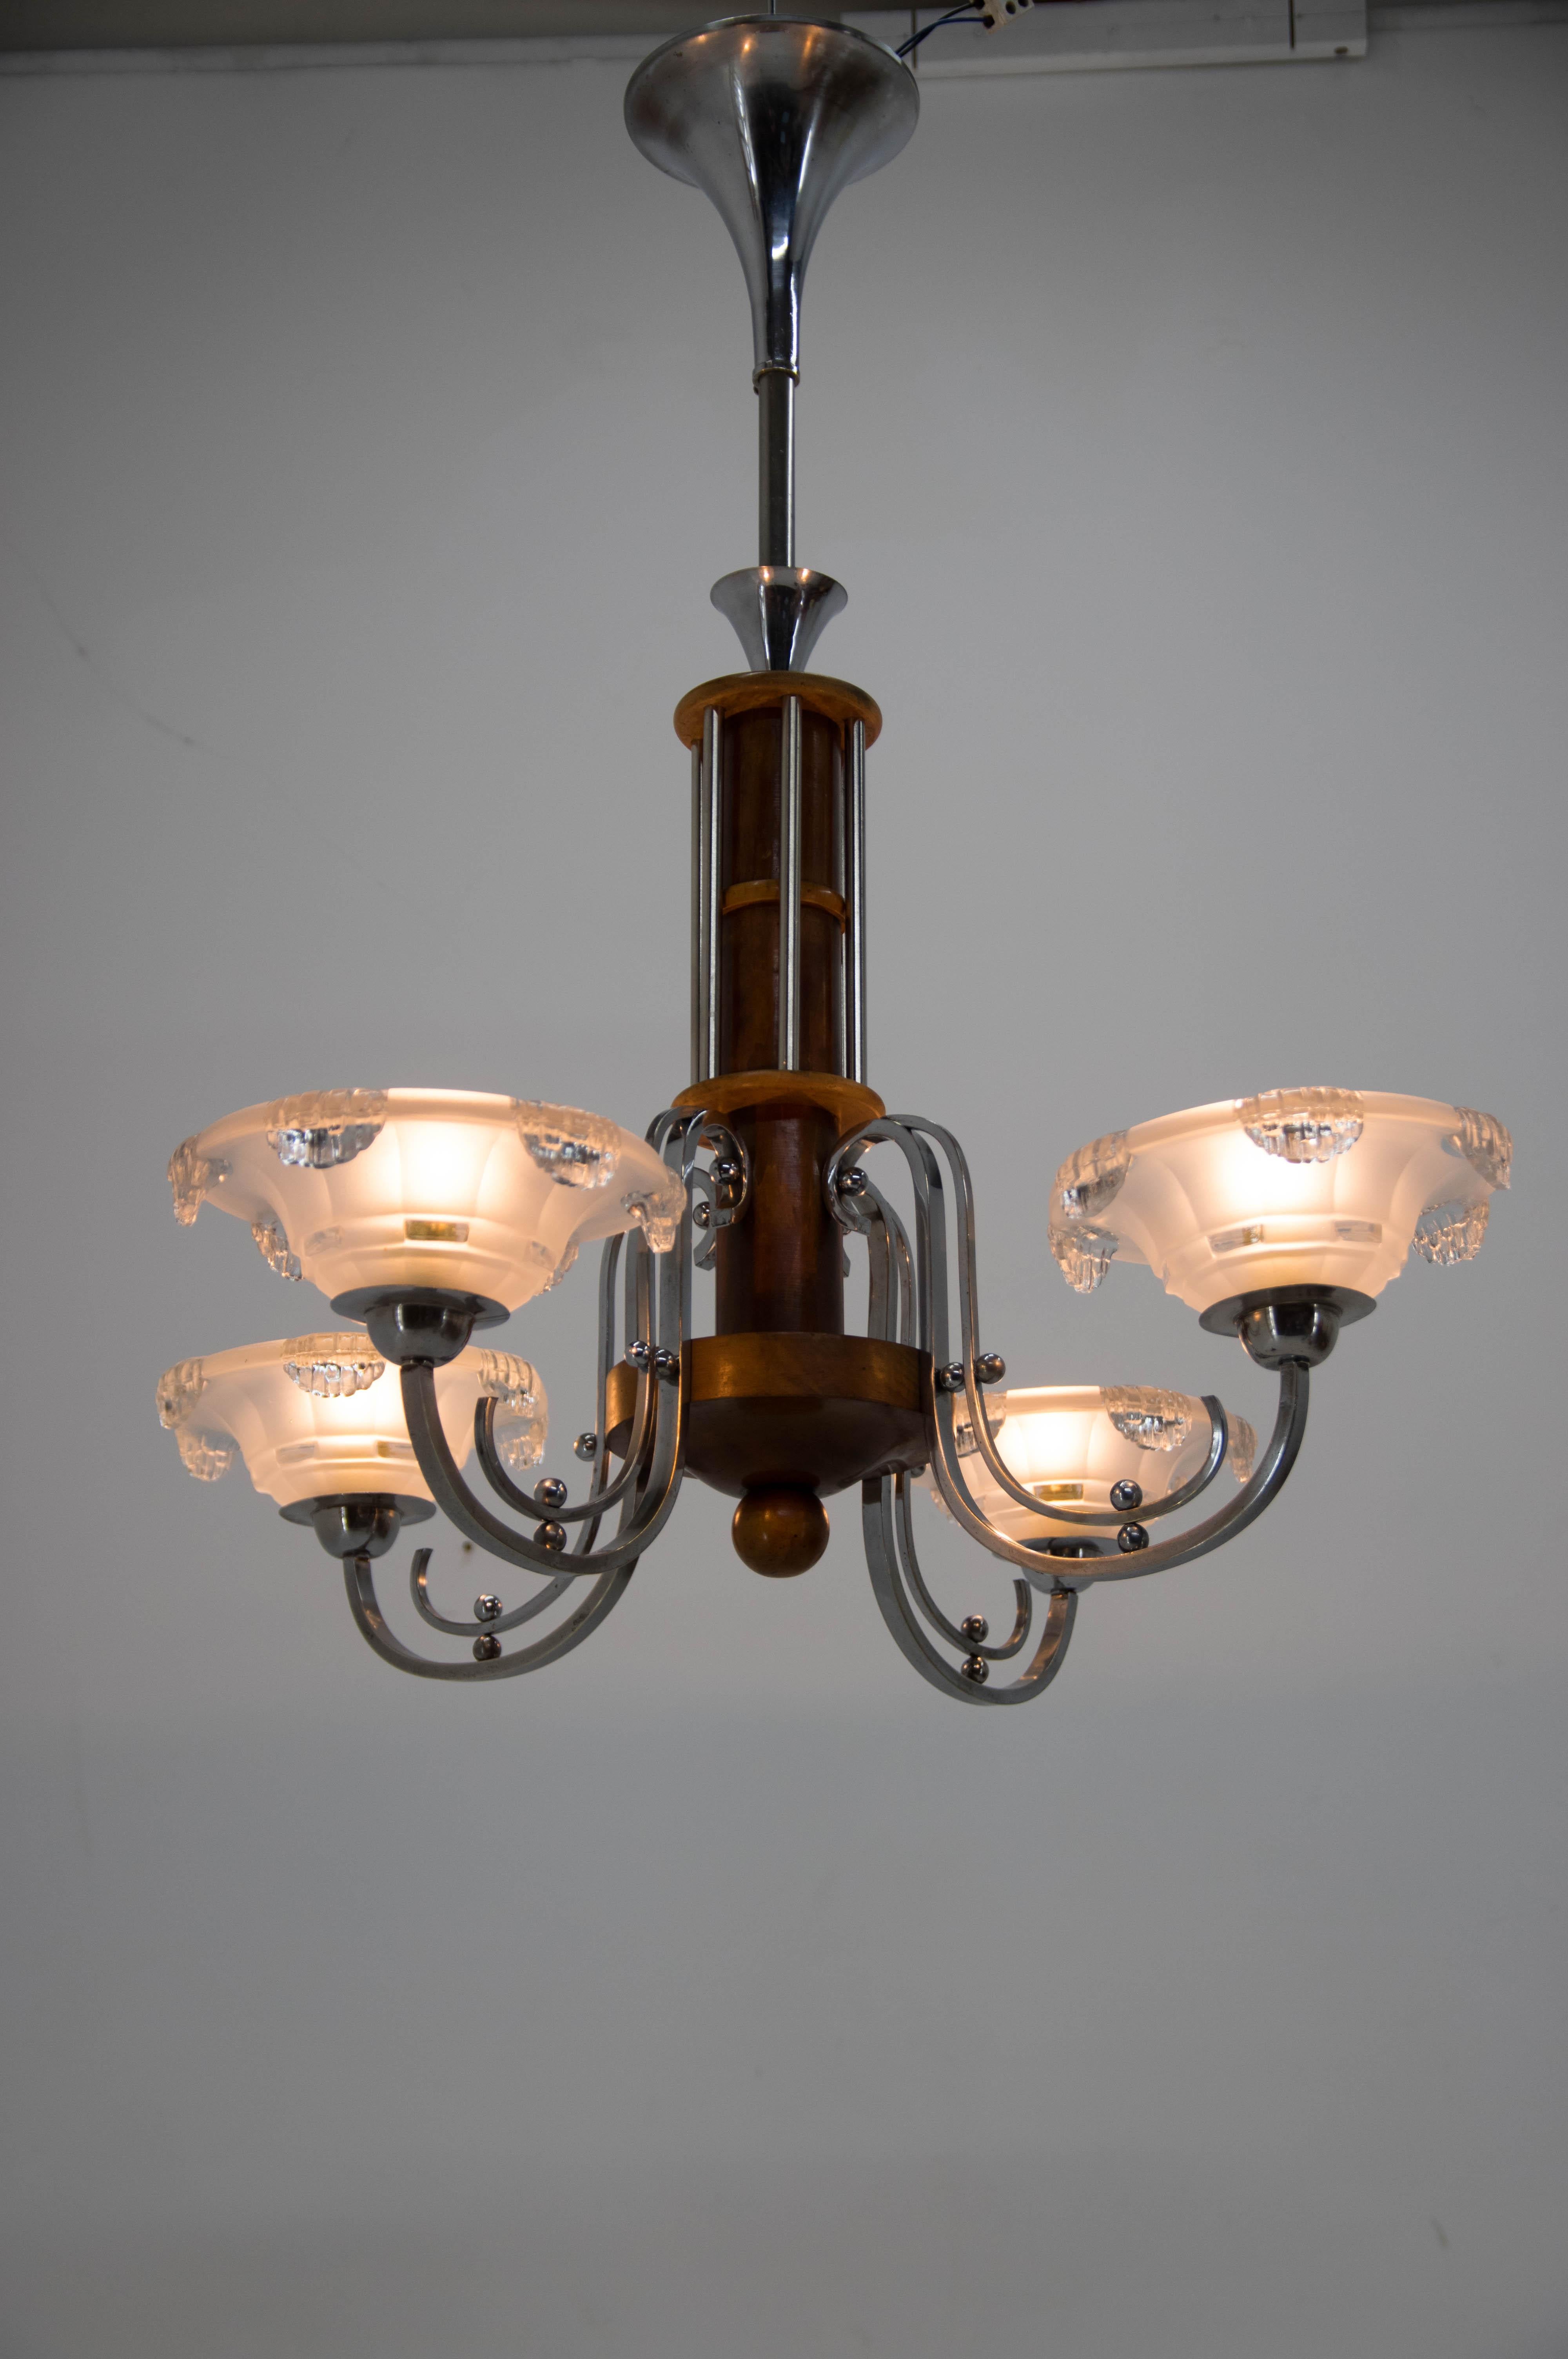 French Art Deco Chandelier Attributed to Ezan & Petitot, 1930s